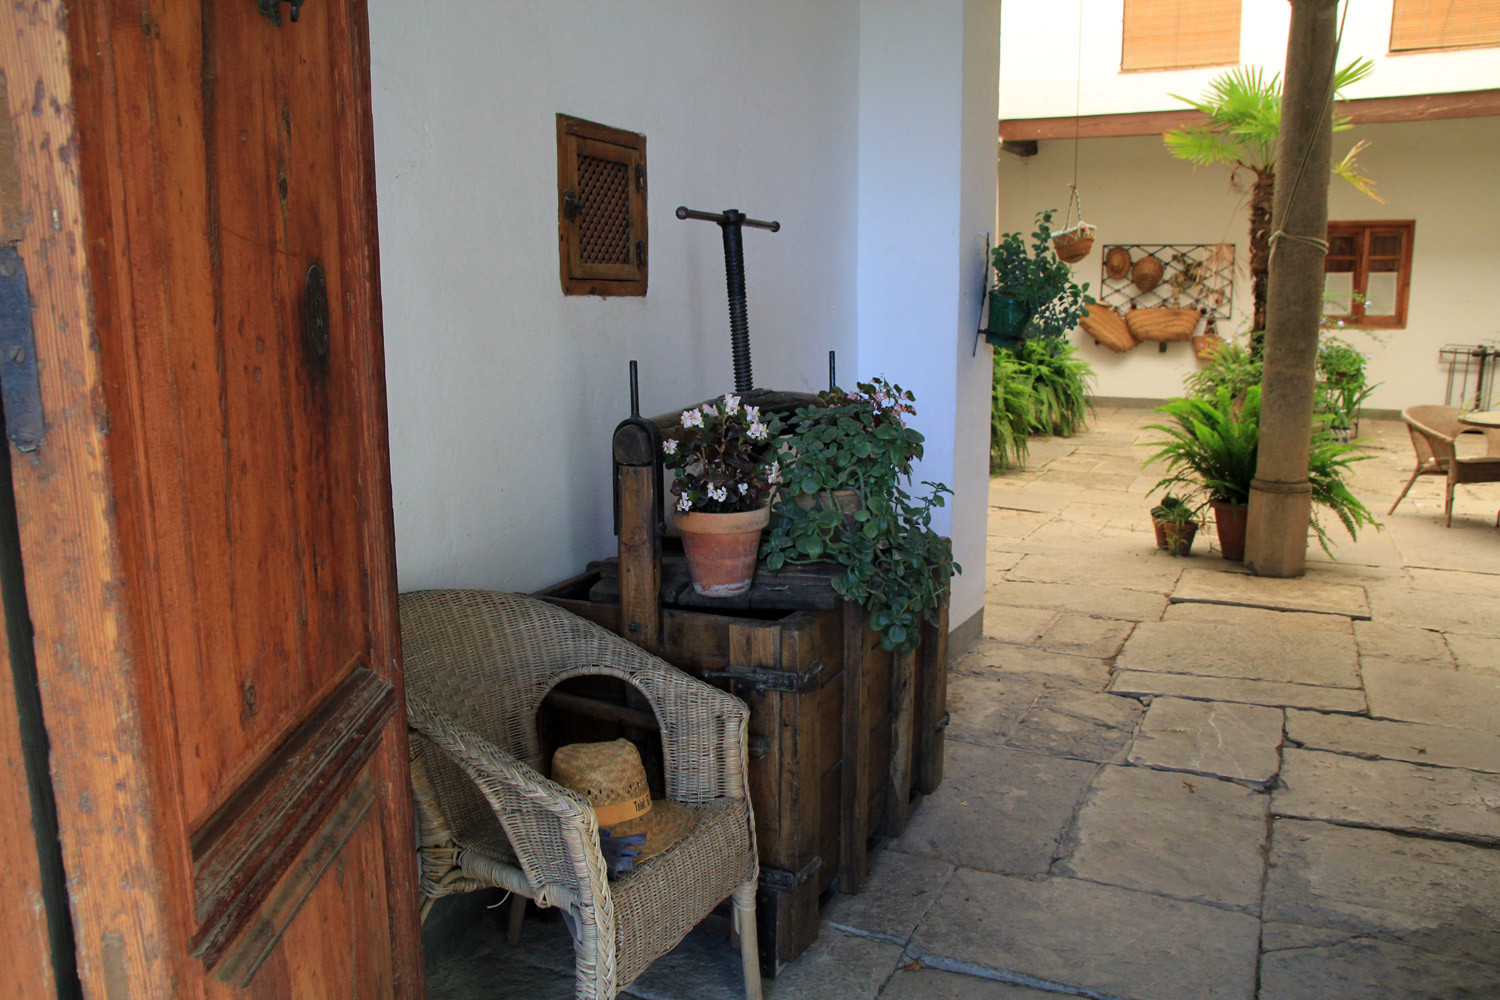 The entrance to the courtyard